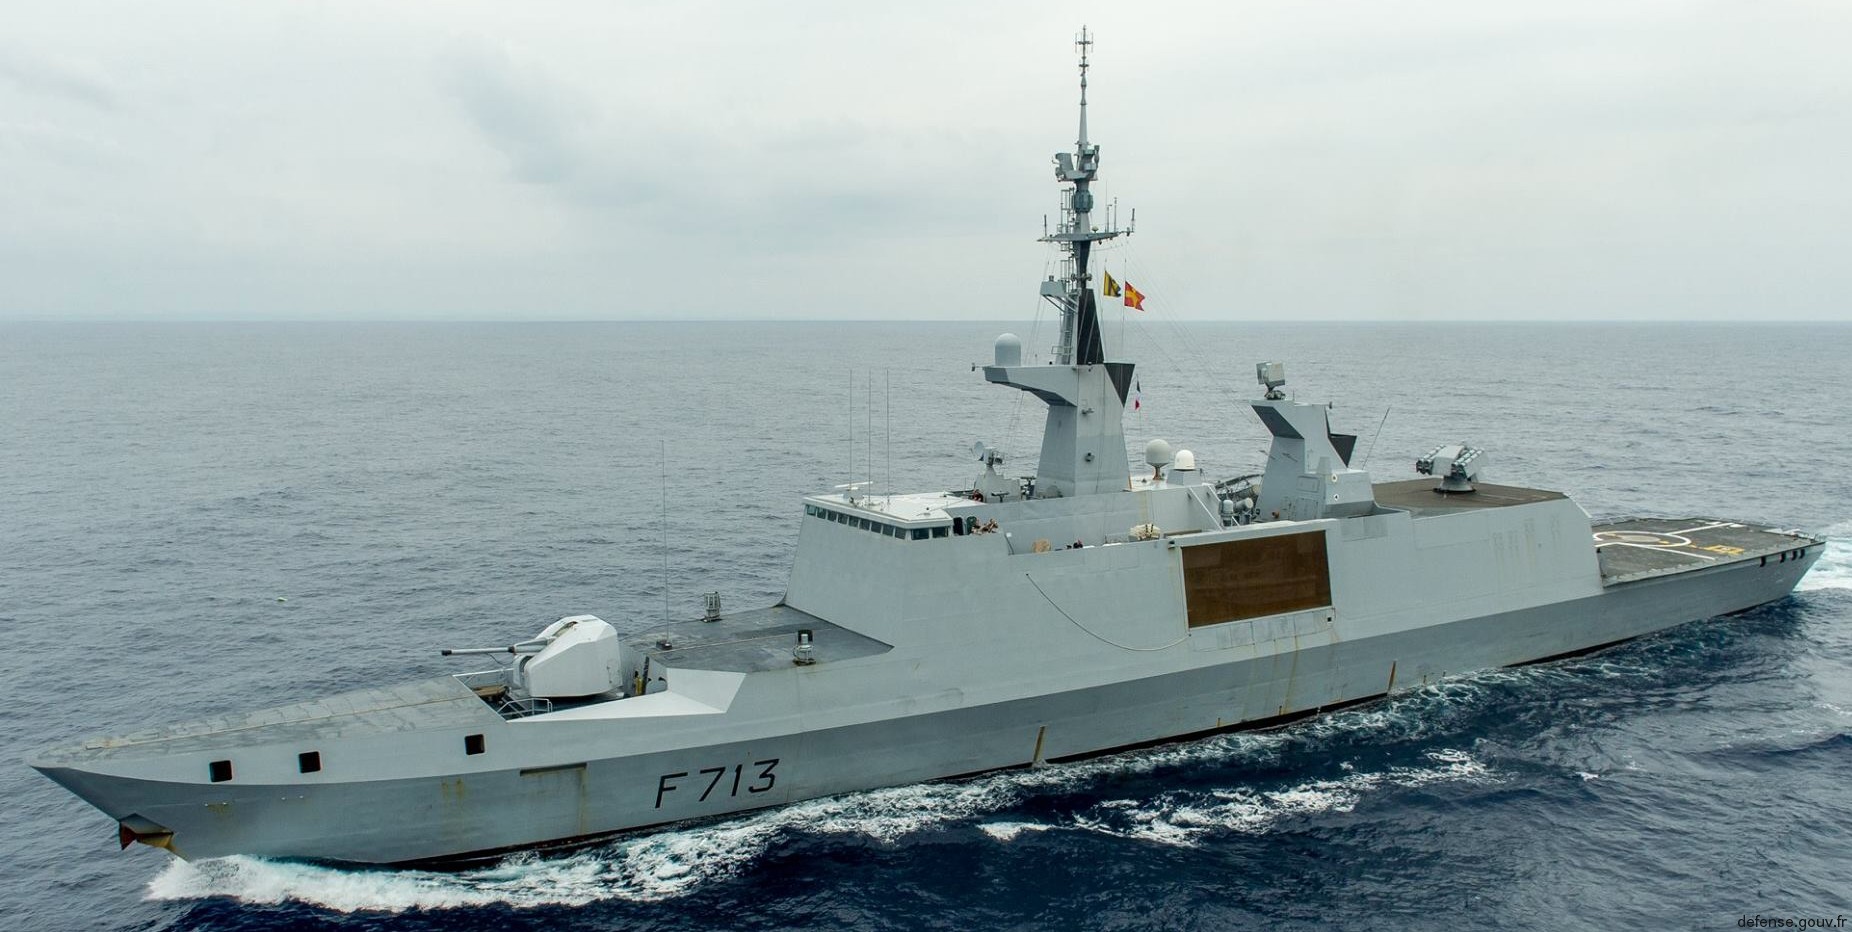 la fayette class frigate french navy marine nationale f-713 aconit 08y